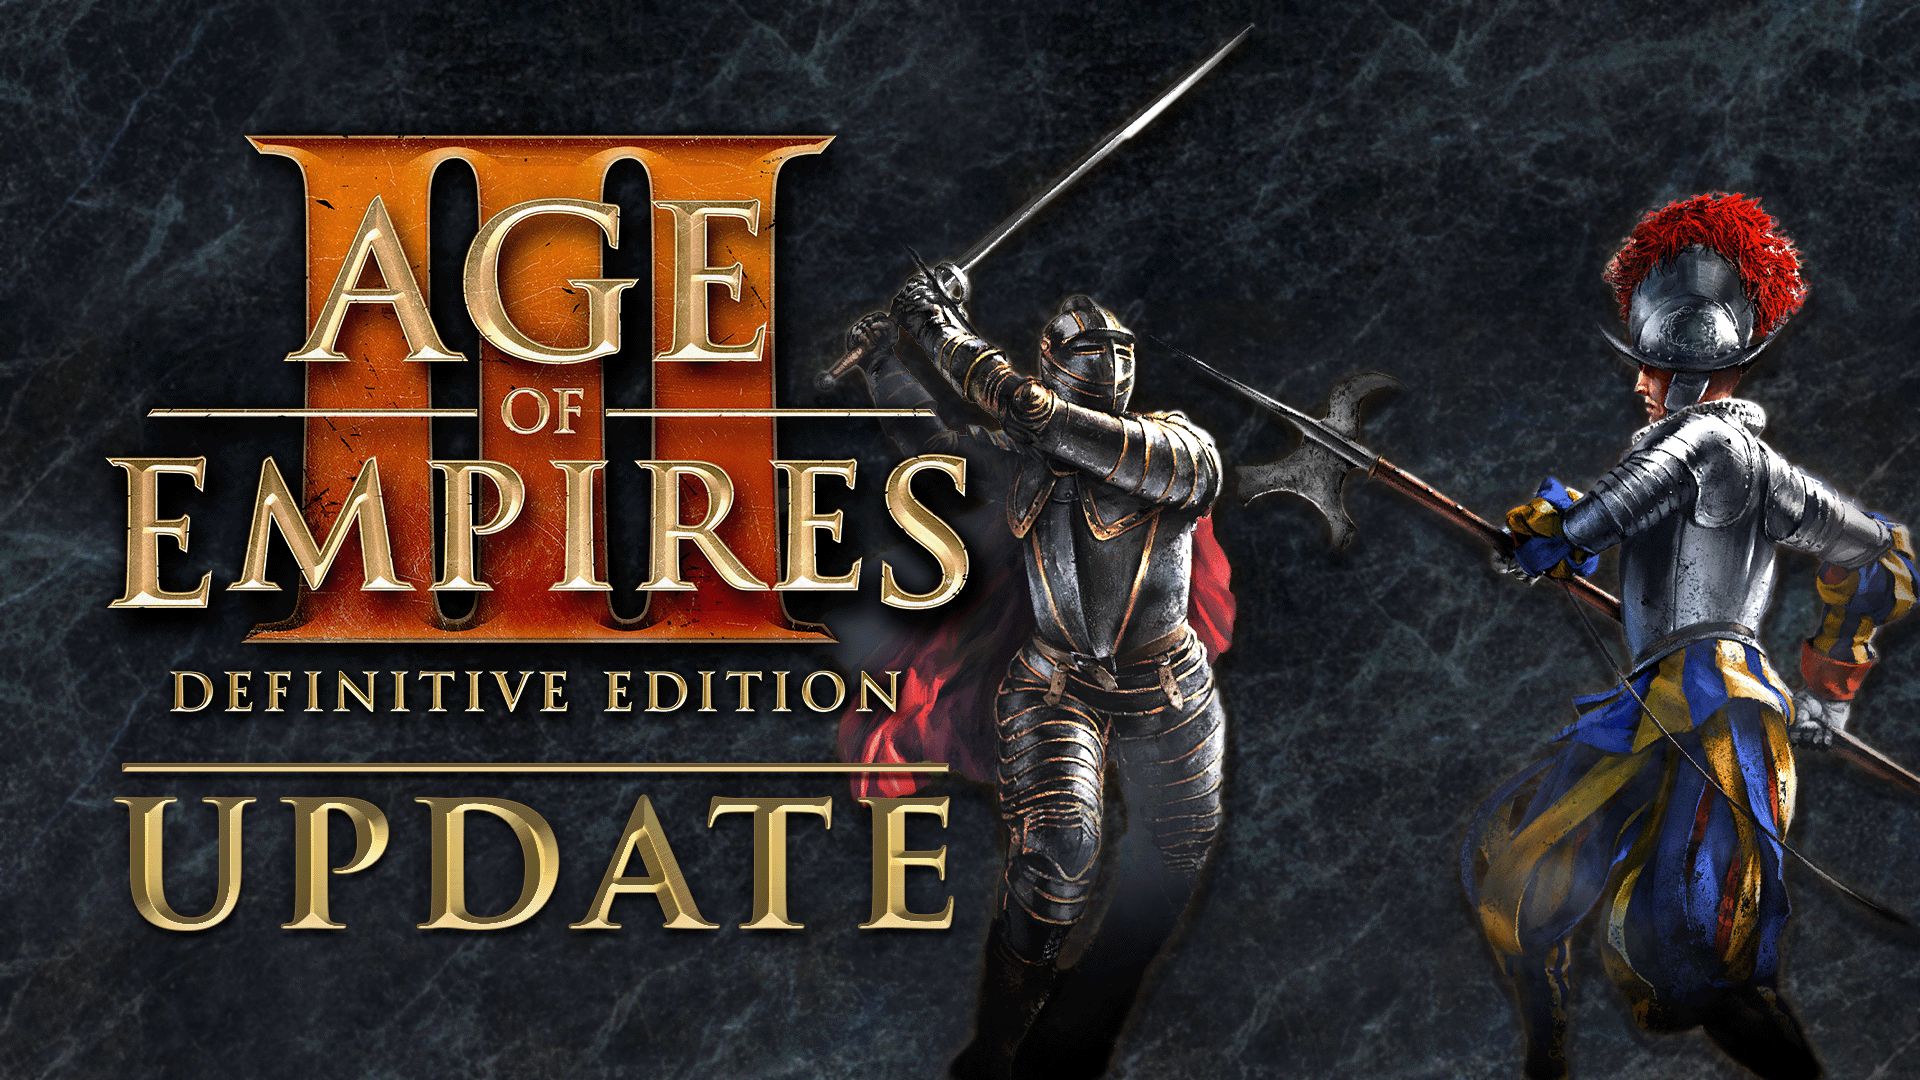 Age of empires 3 in steam фото 62